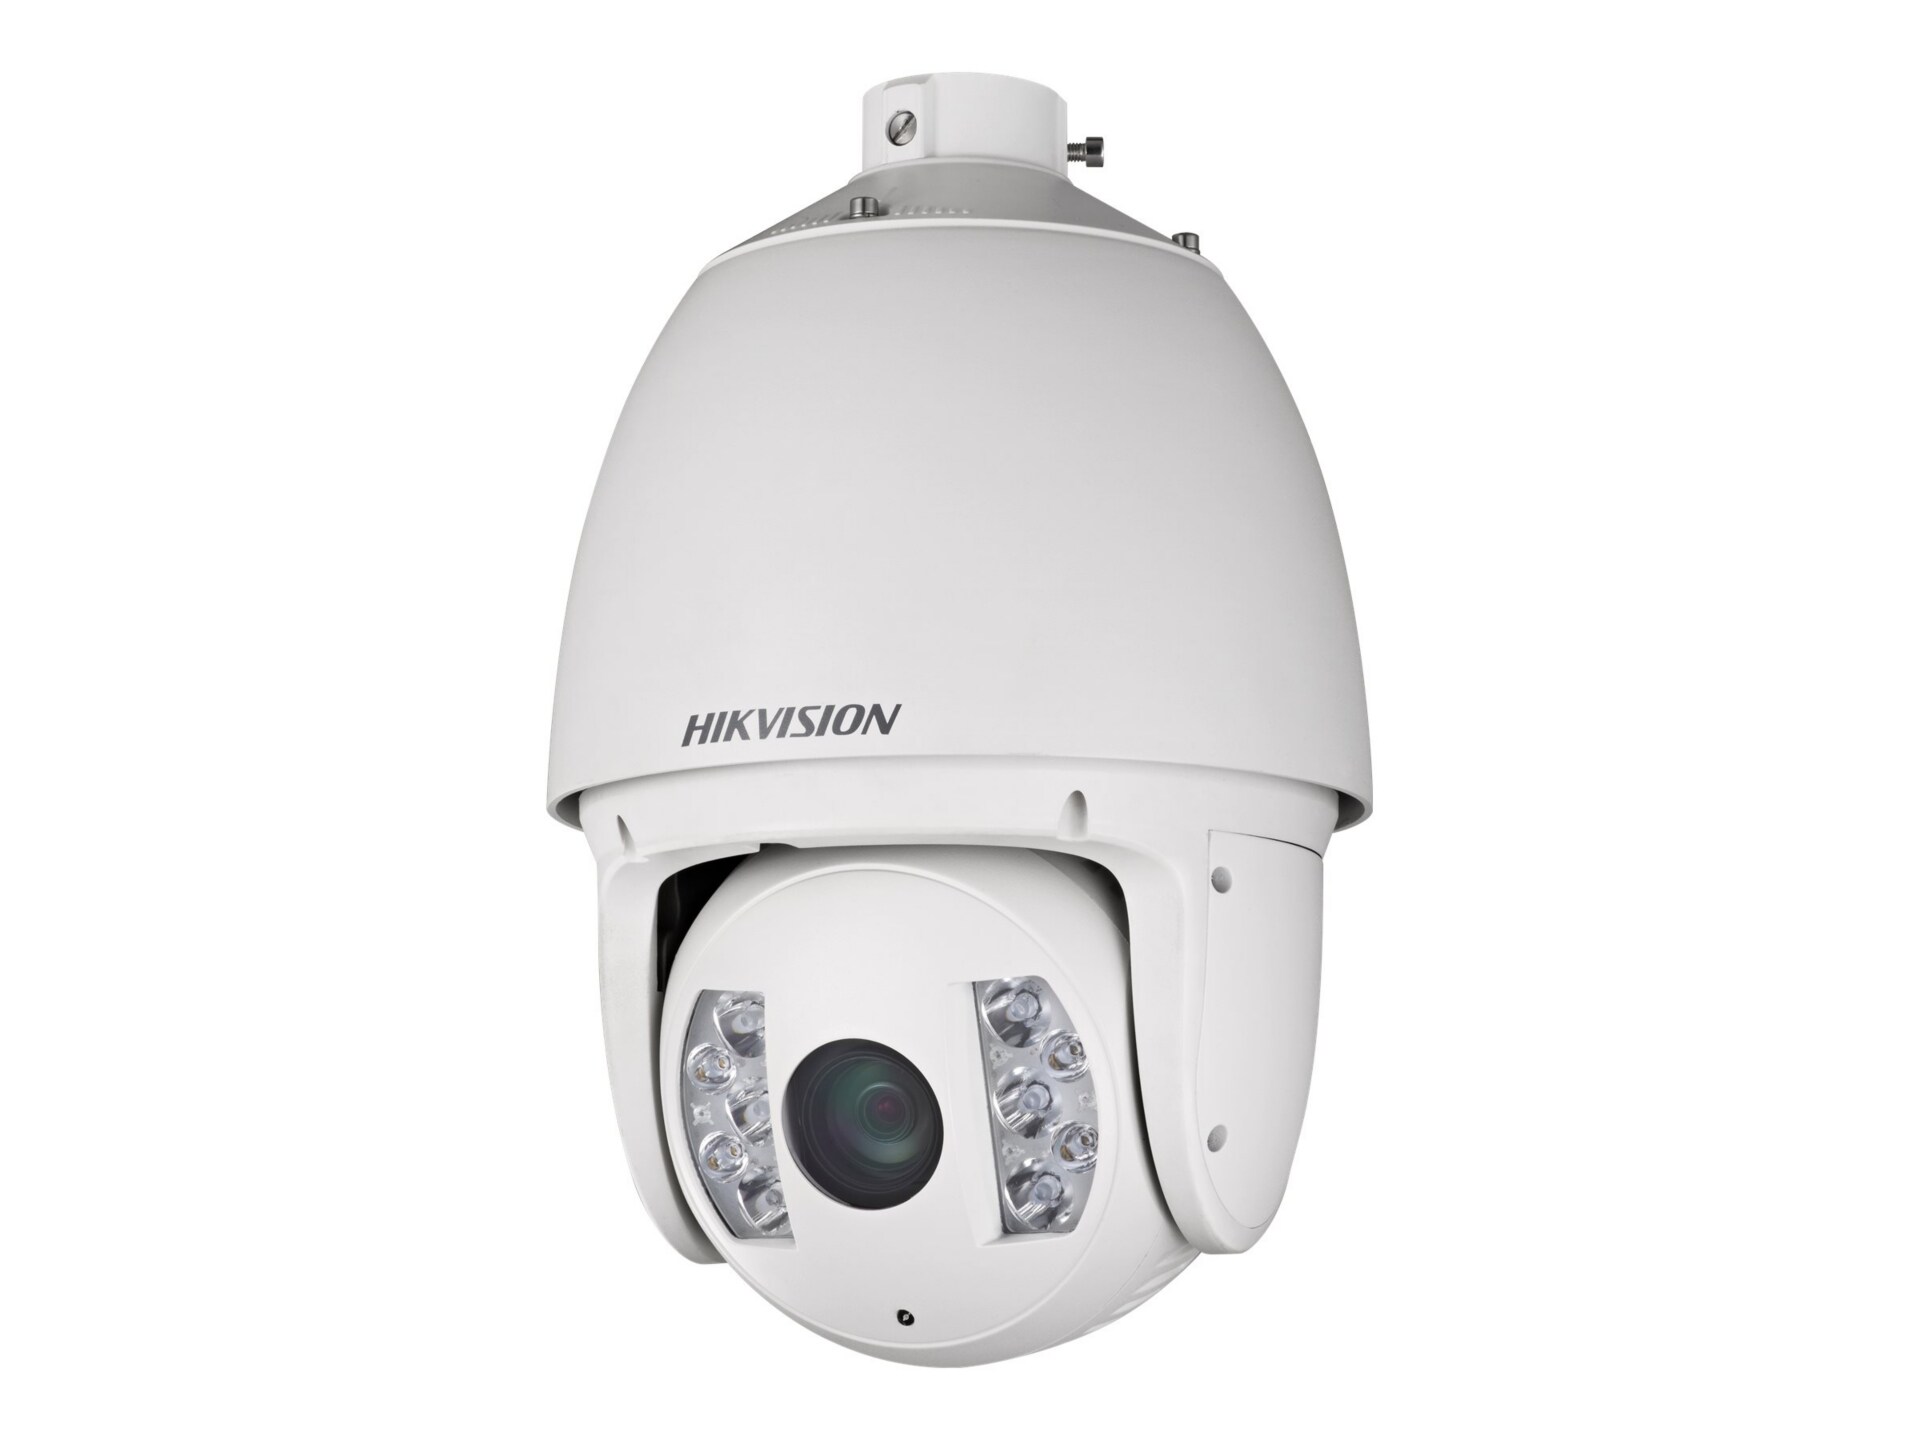 Hikvision Network Speed Dome DS-2DF7286-AEL - network surveillance camera